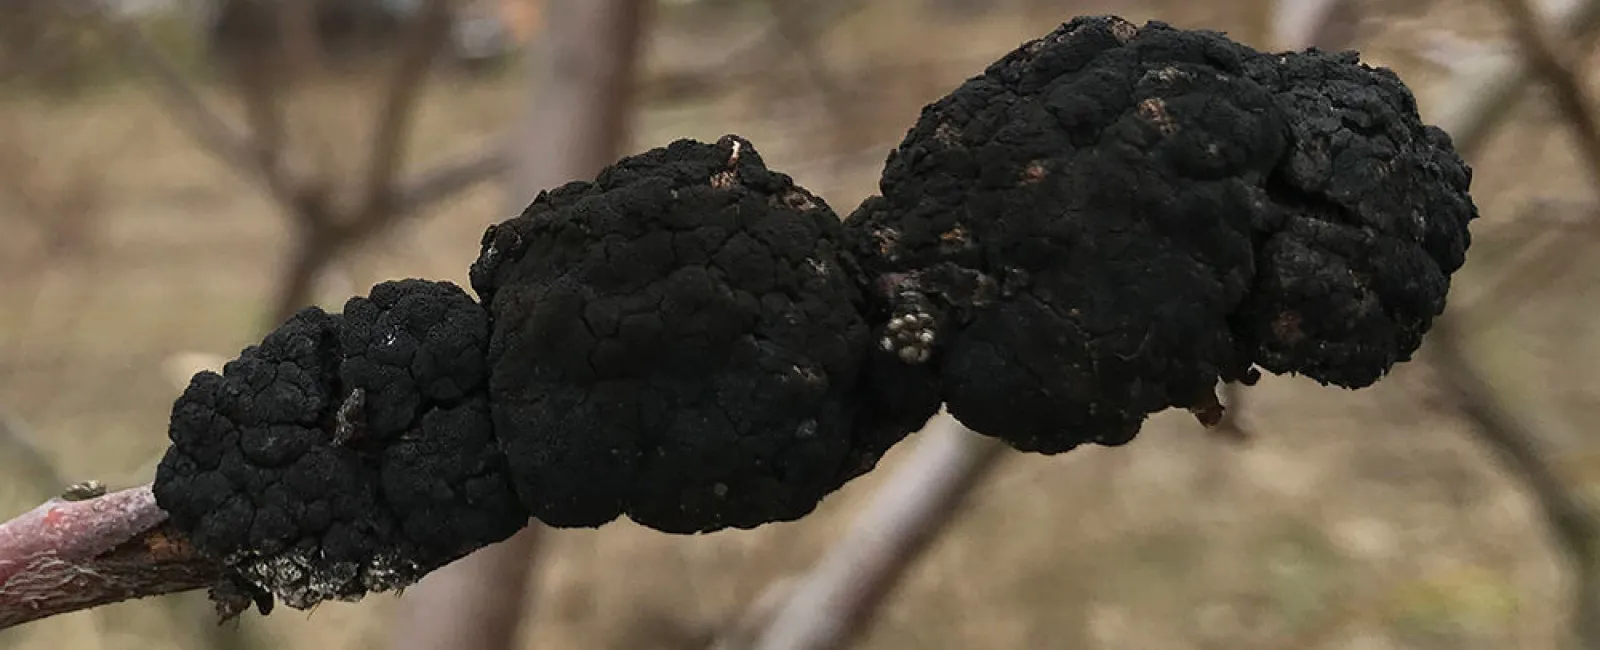 Does My Tree Have Black Knot Fungus?